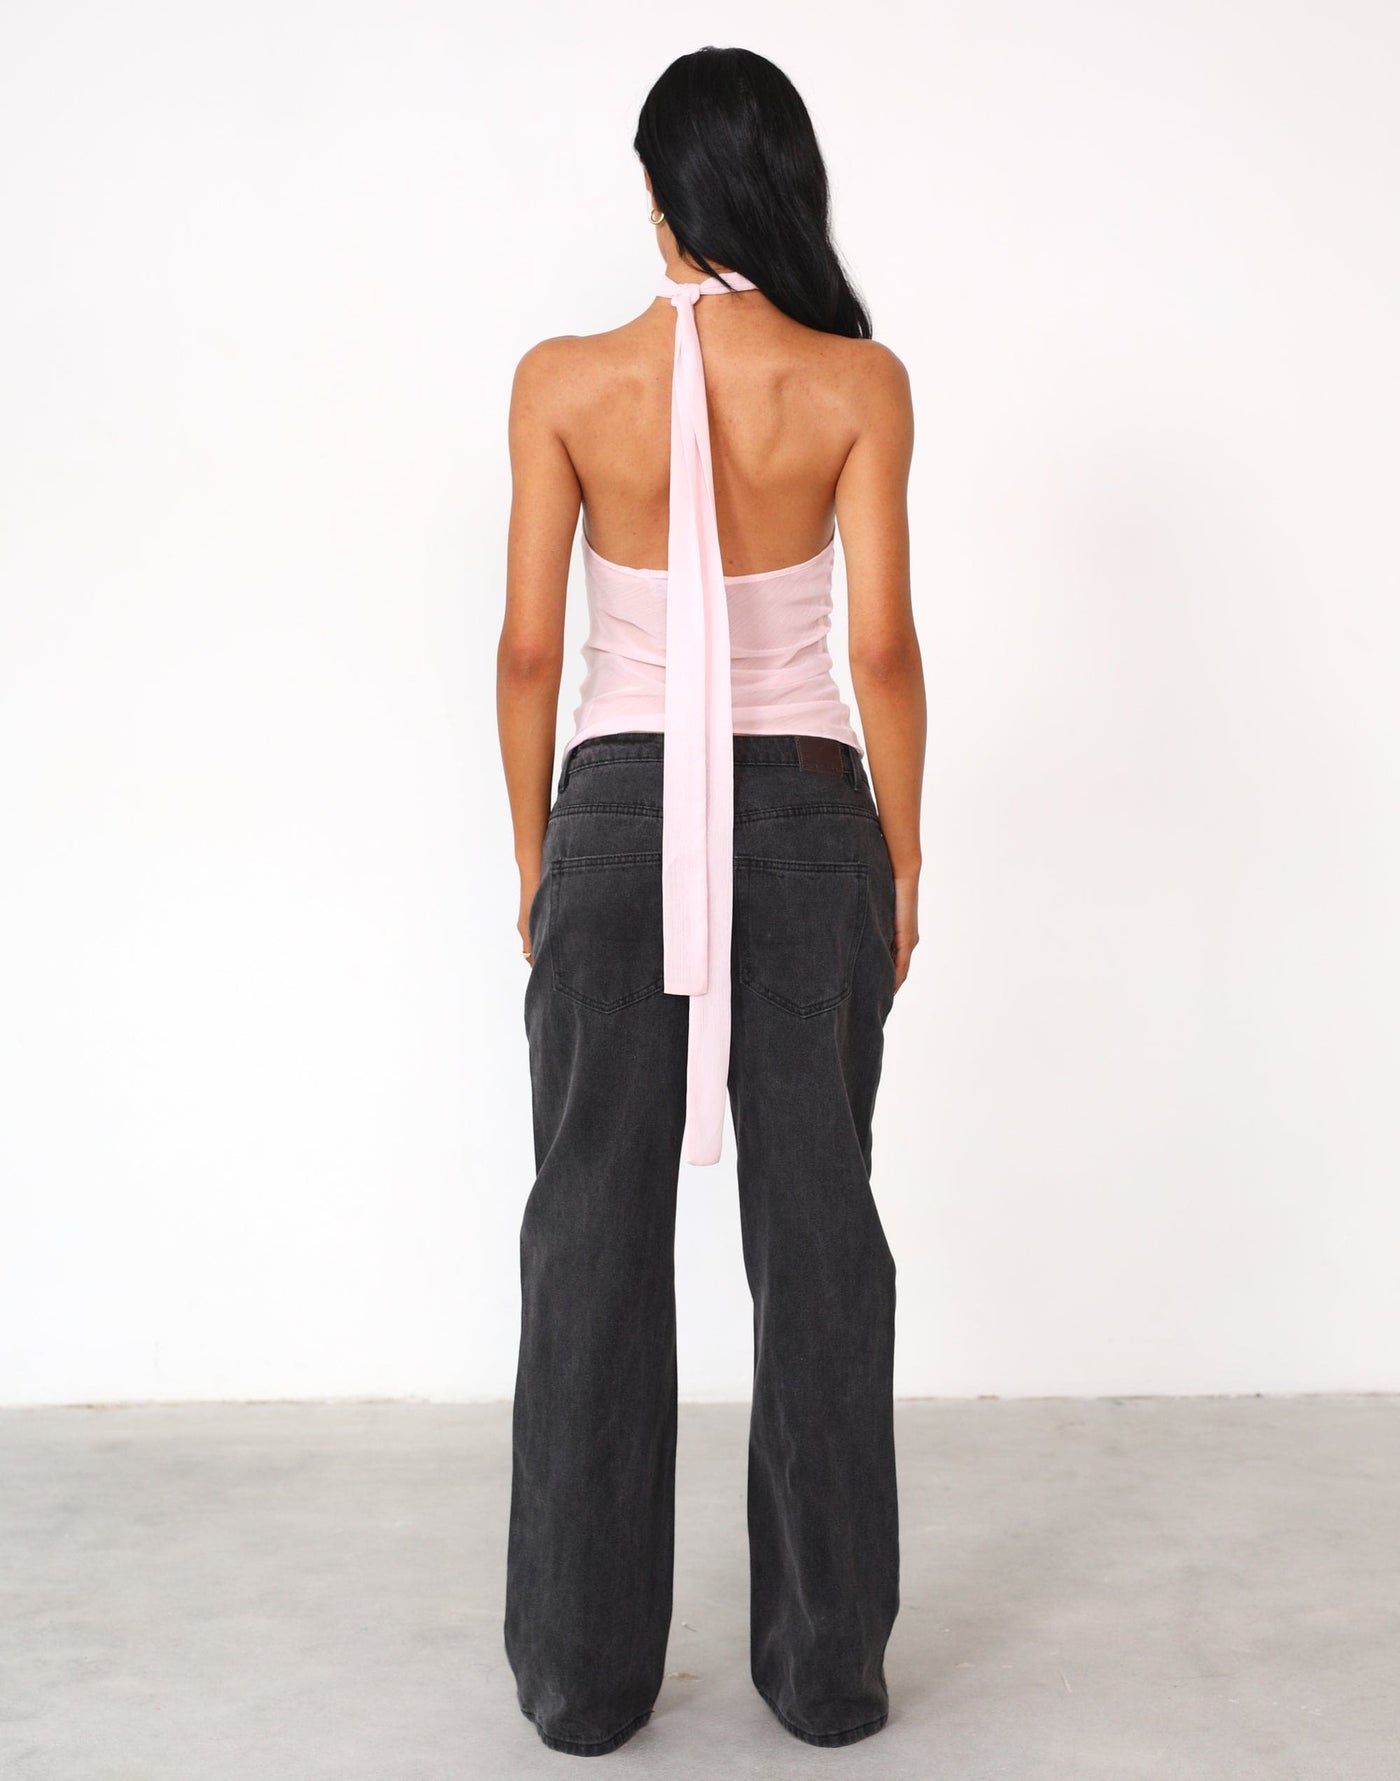 Lux Tie Top (Blush) - By Lioness - Sheer High Neck Asymmetrical Top - Women's Tops - Charcoal Clothing